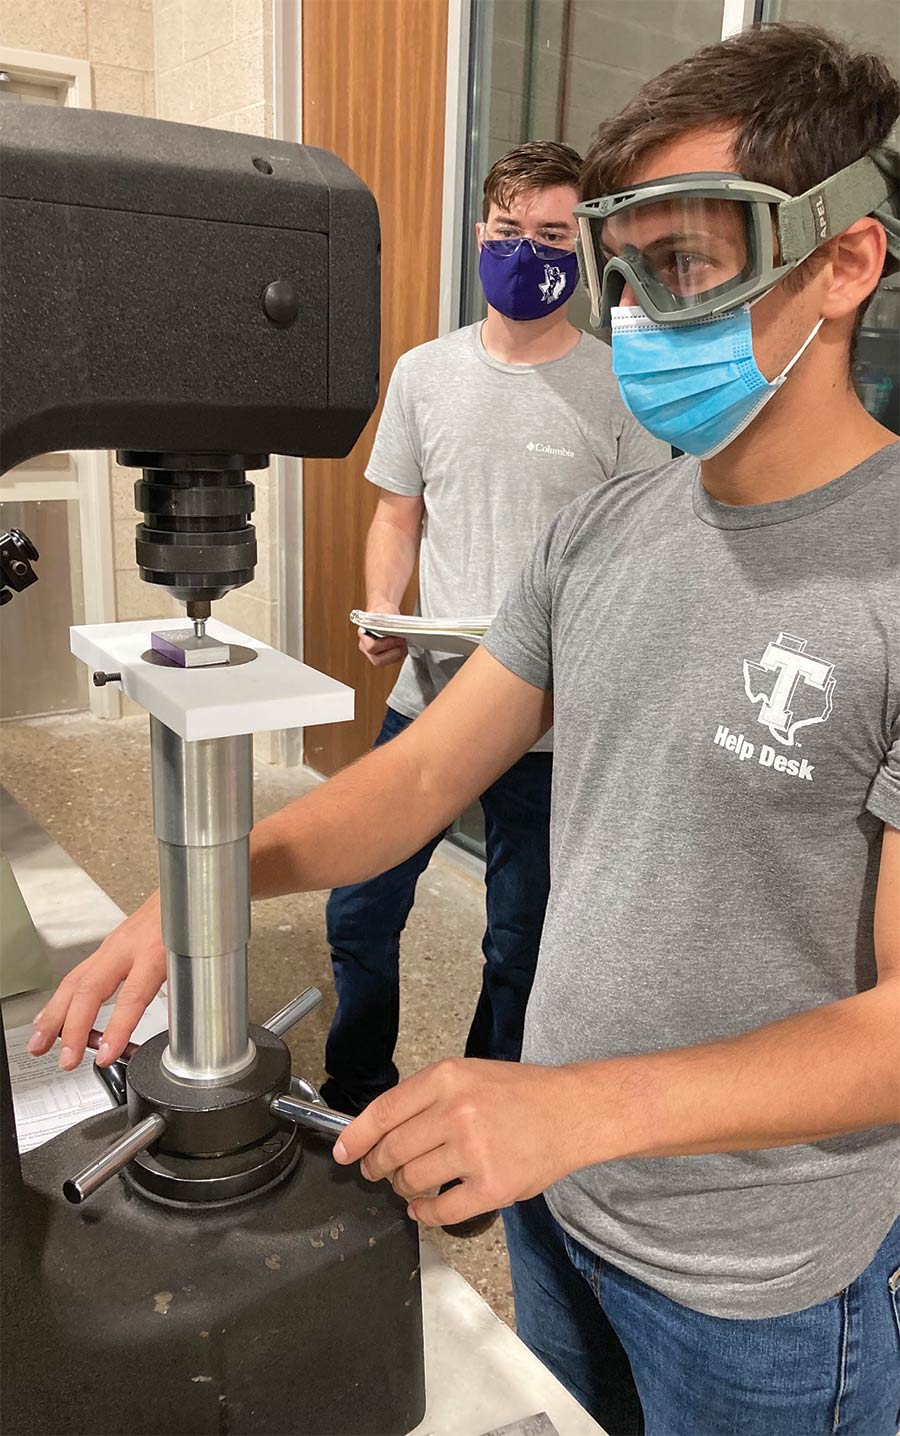 students working on welding project at Tarleton State University